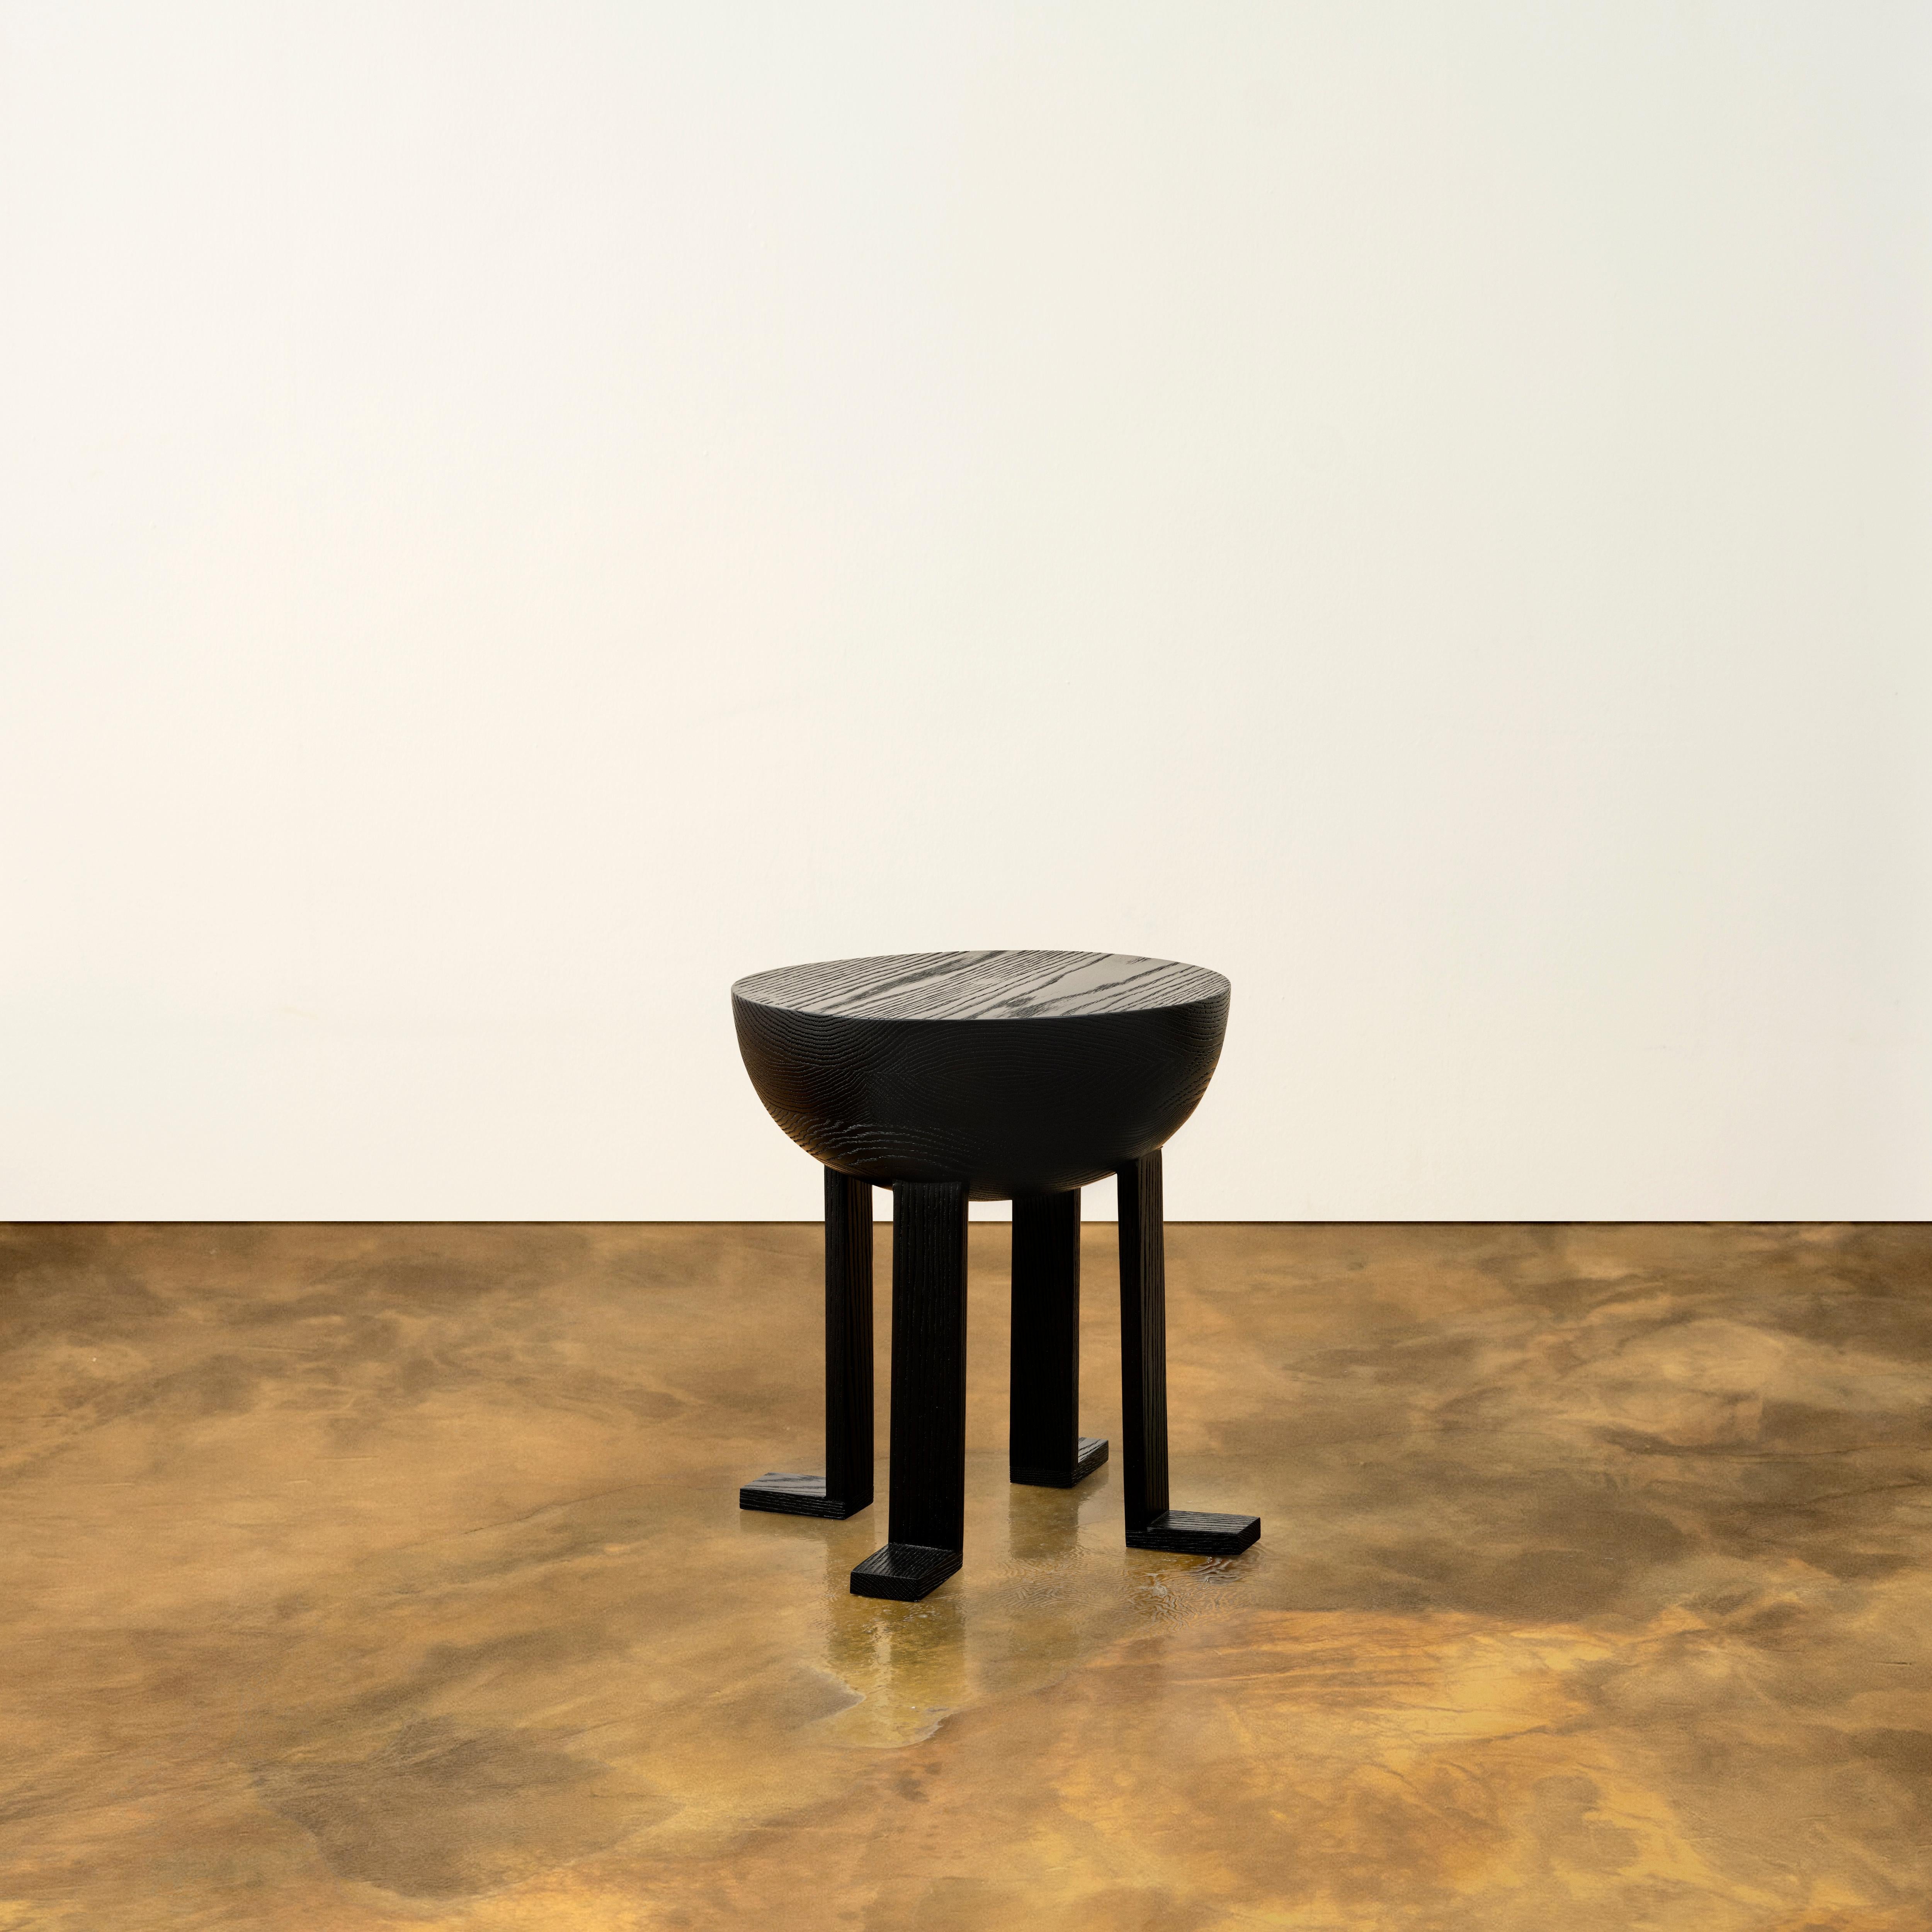 Crafted in solid oak, this side table embraces modernity and playfulness. It’s unusual legs, inspired by the Commedia dell’Arte character Pierrot’s long sleeves, celebrates the line between stage and life. This sculptural piece is perfect to be used